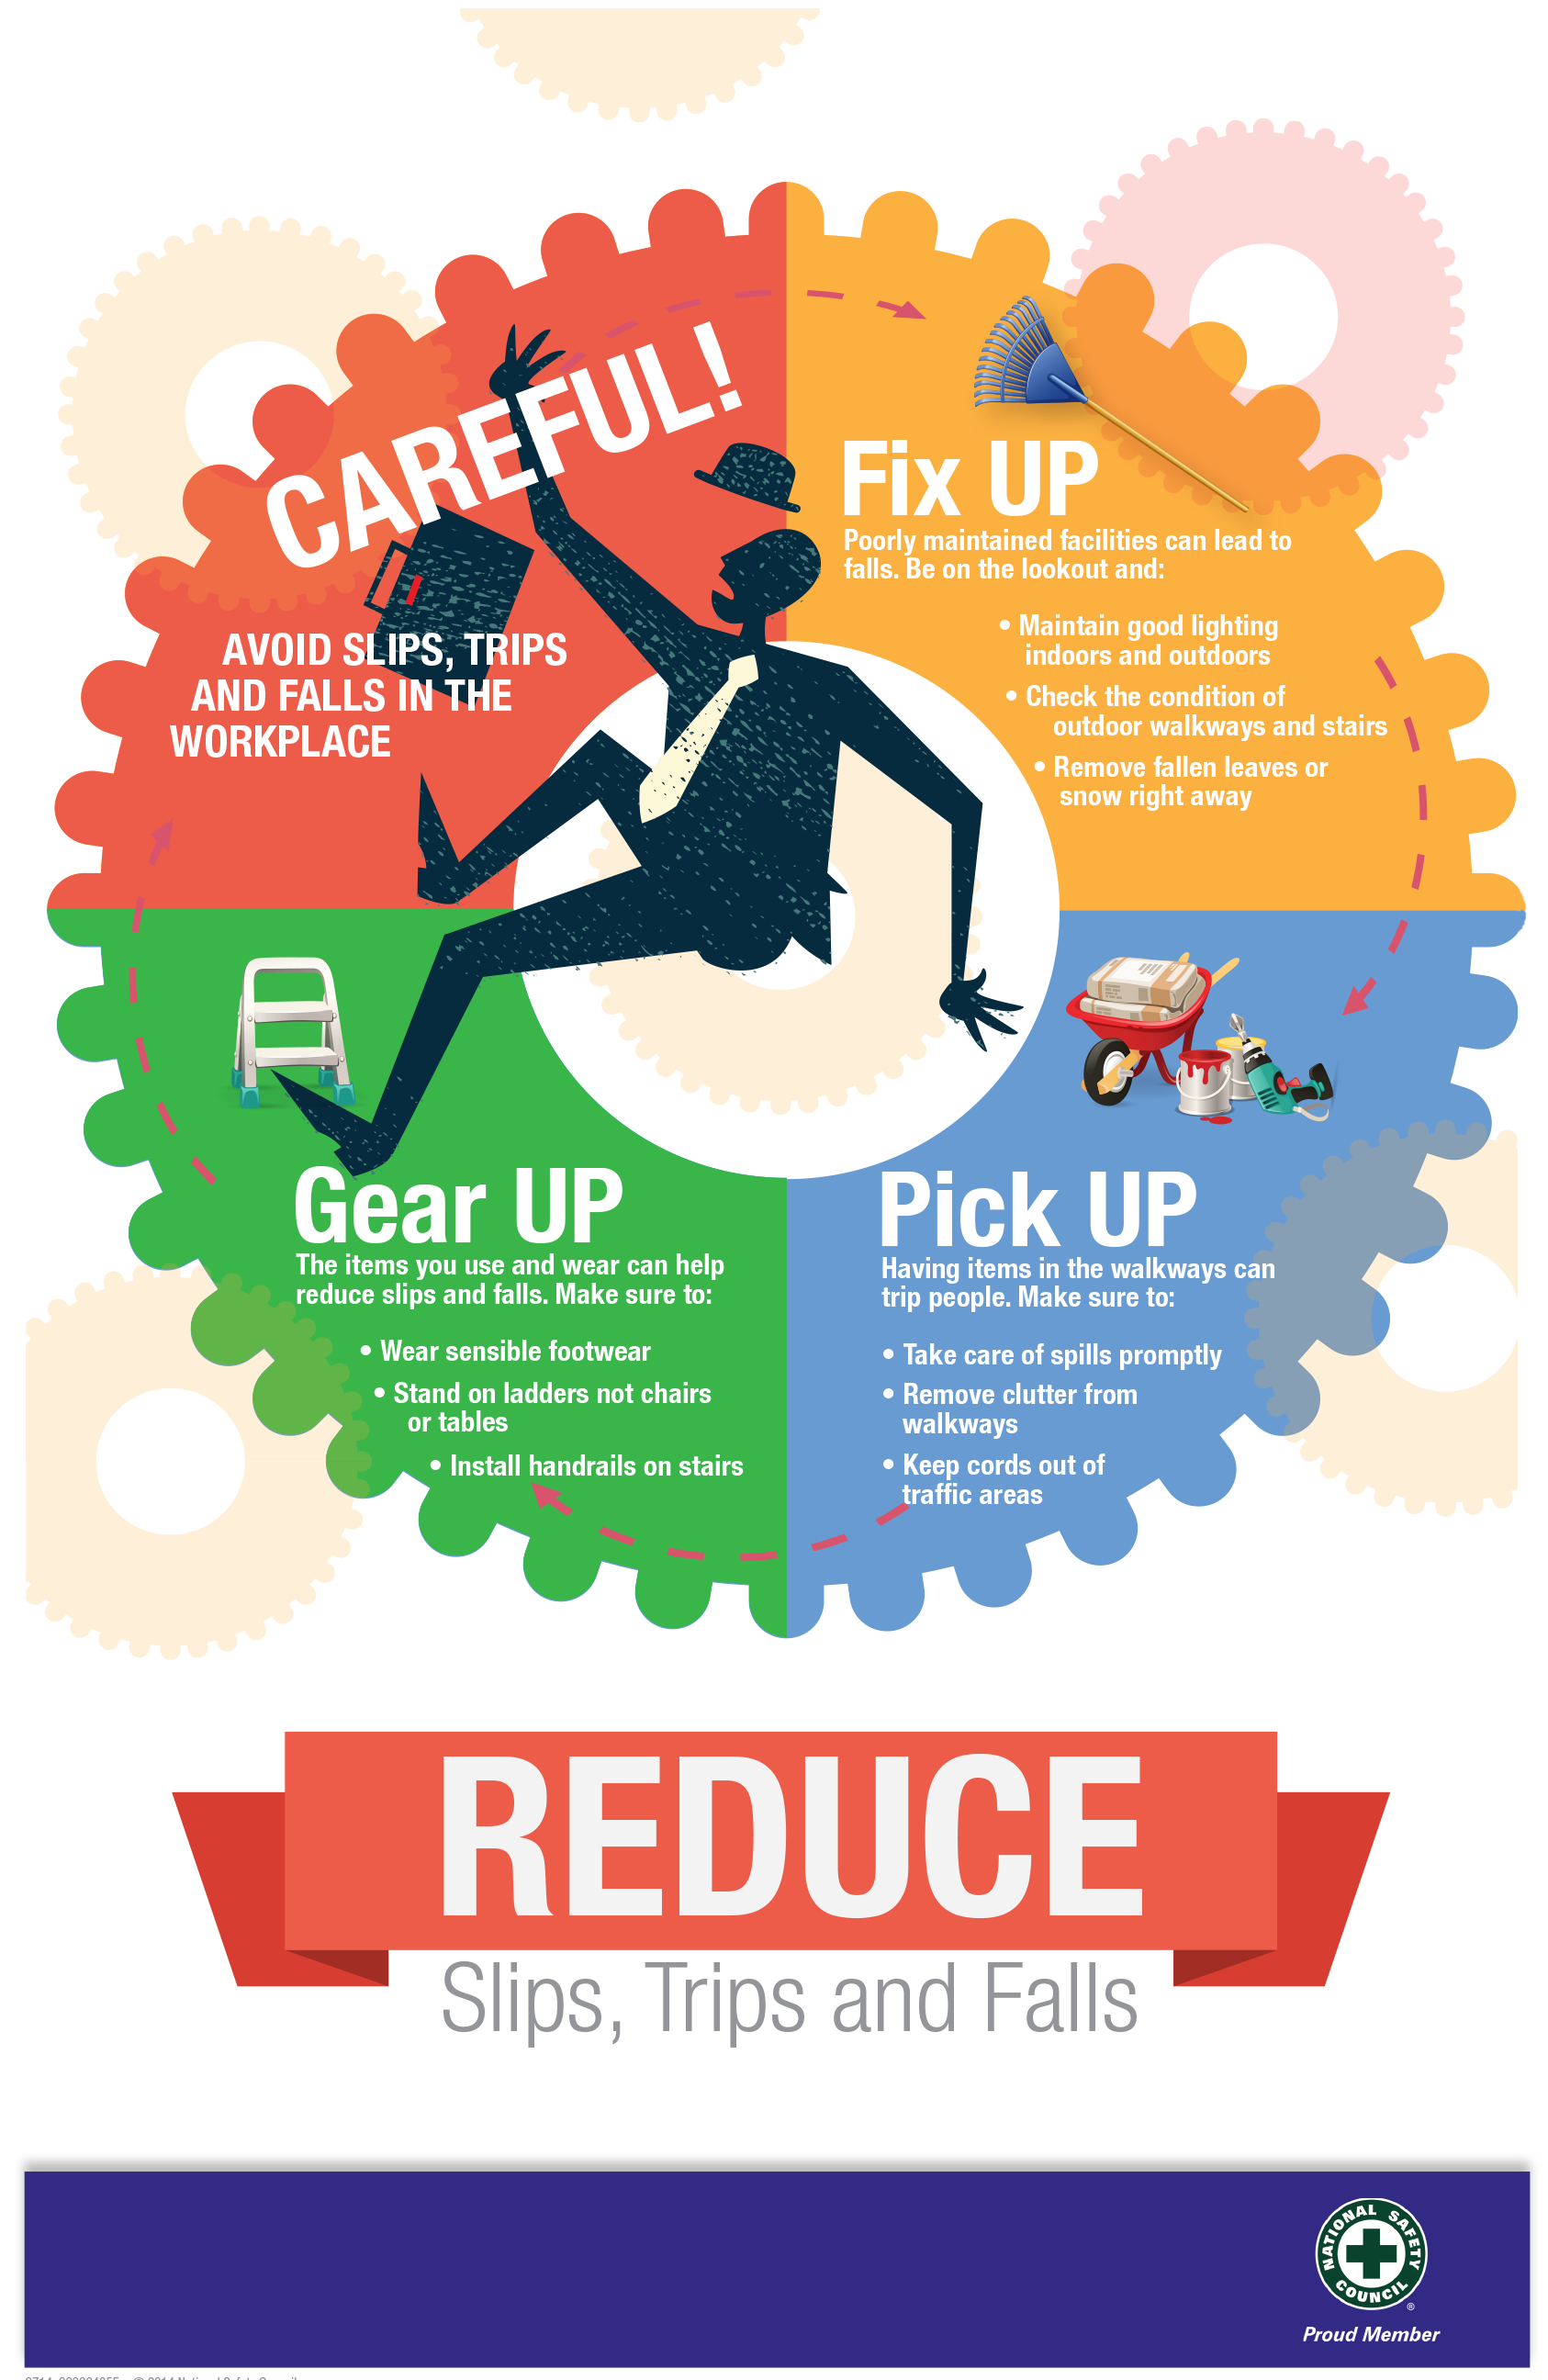 Careful! Fix up! Pick Up and Gear Up graphic